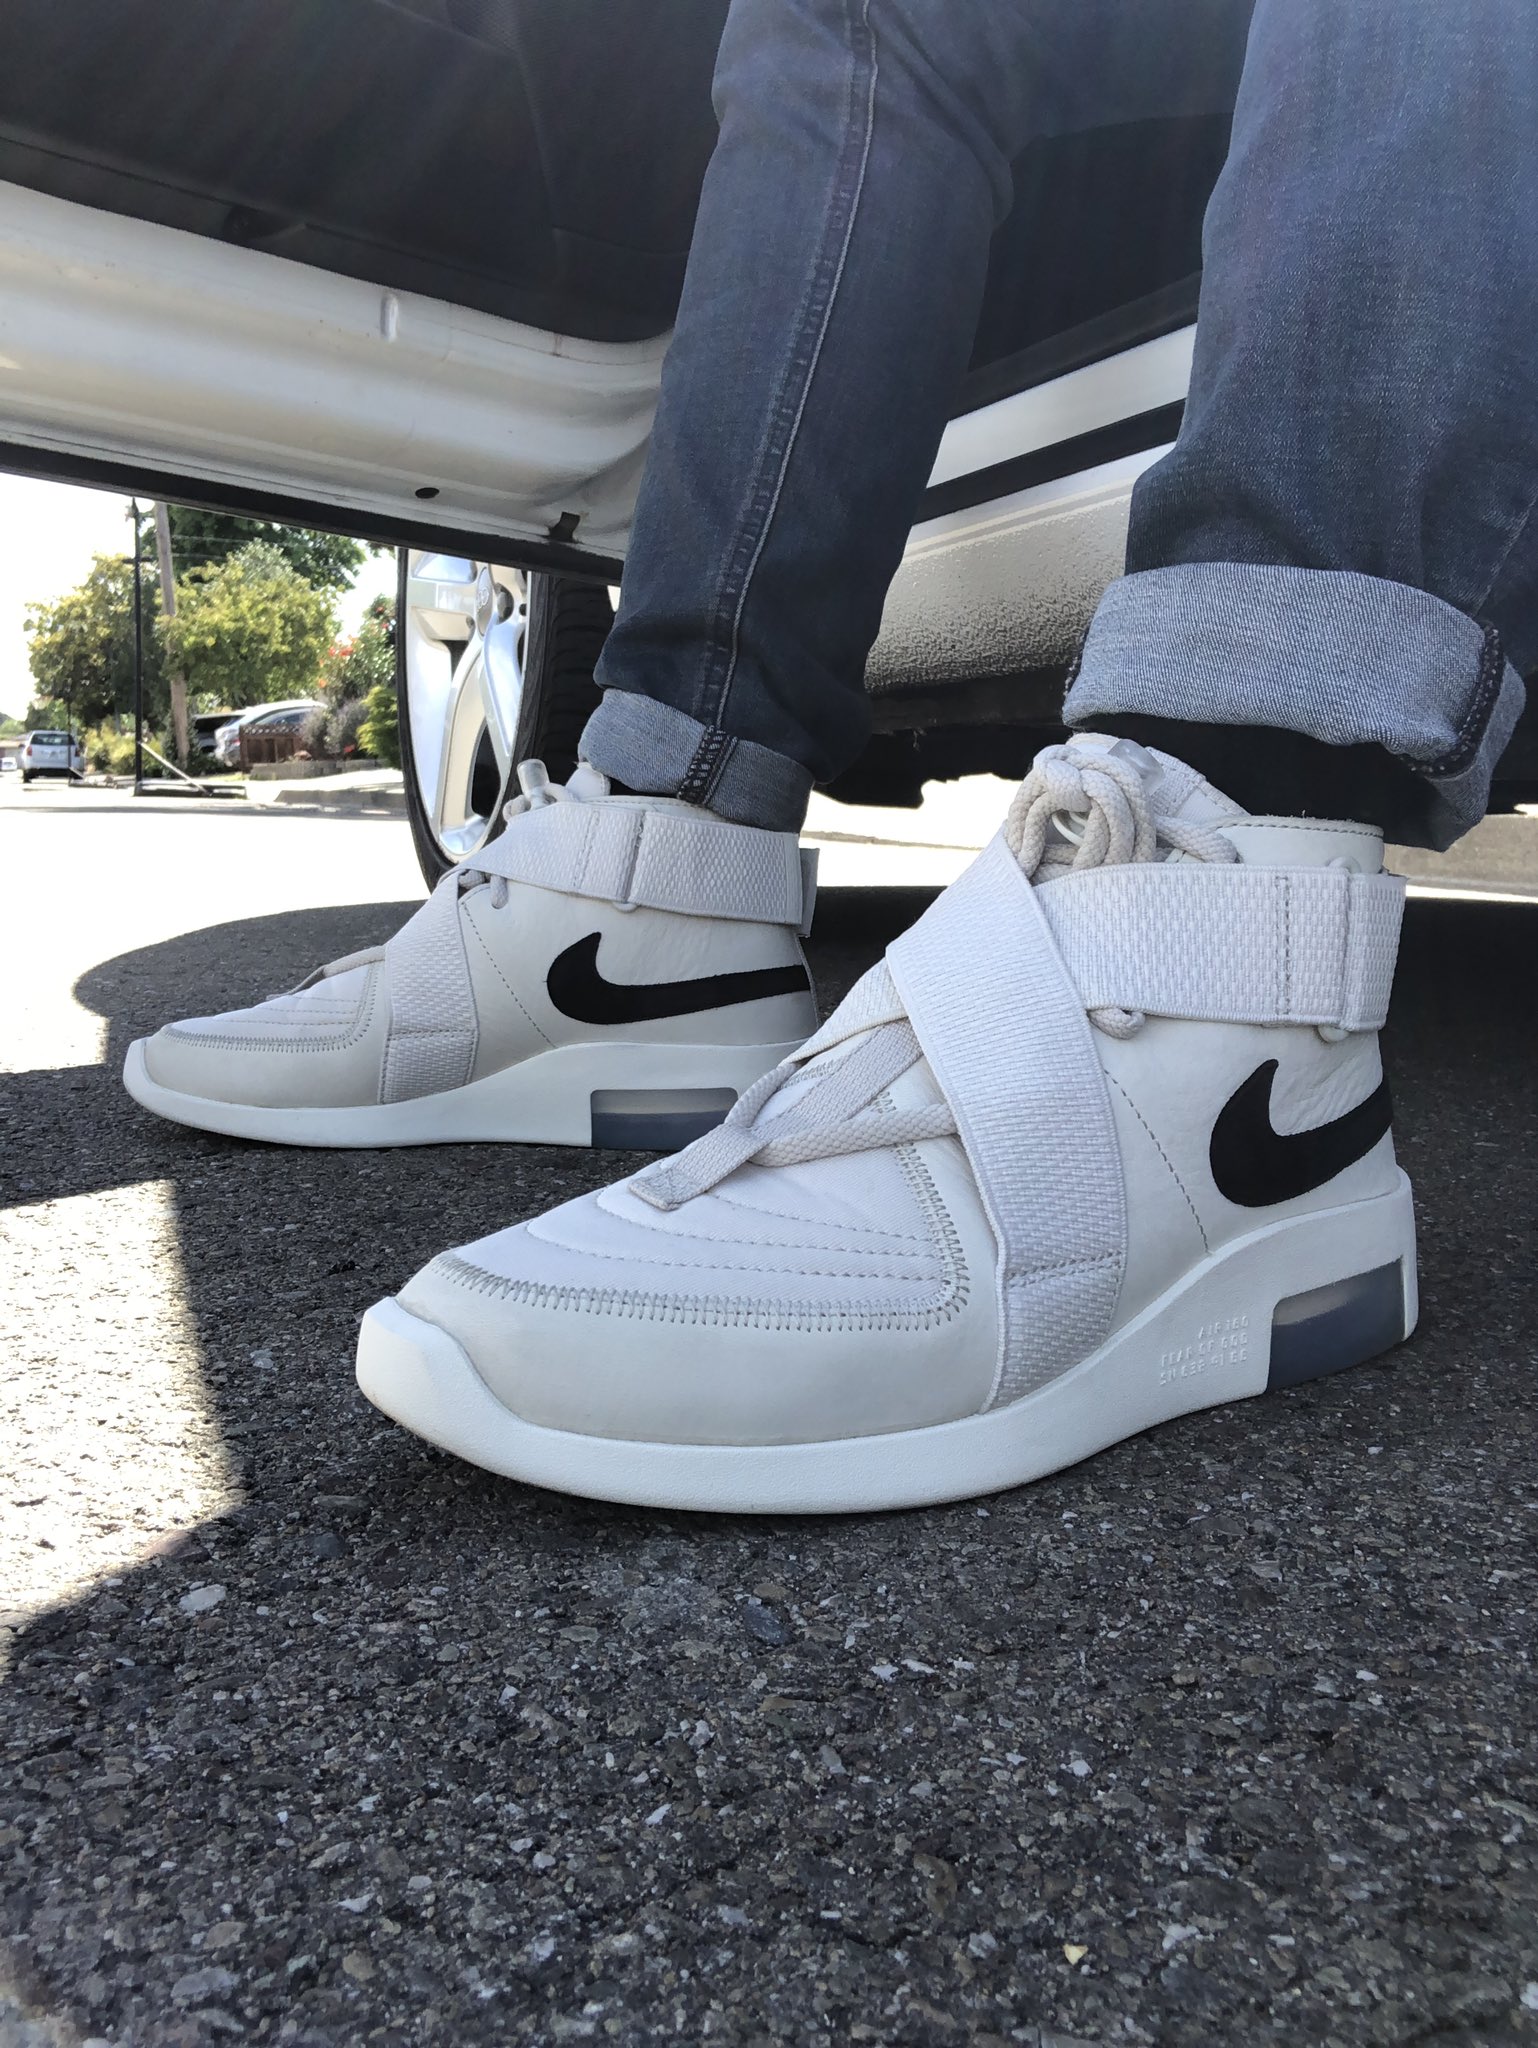 Sean 👑 on Twitter: "#kotd #shoes #drip Nike Air FoG Raid LB As promised if  my car was ready for pickup (literally an hr before closing), I'd rock  these bad bois to